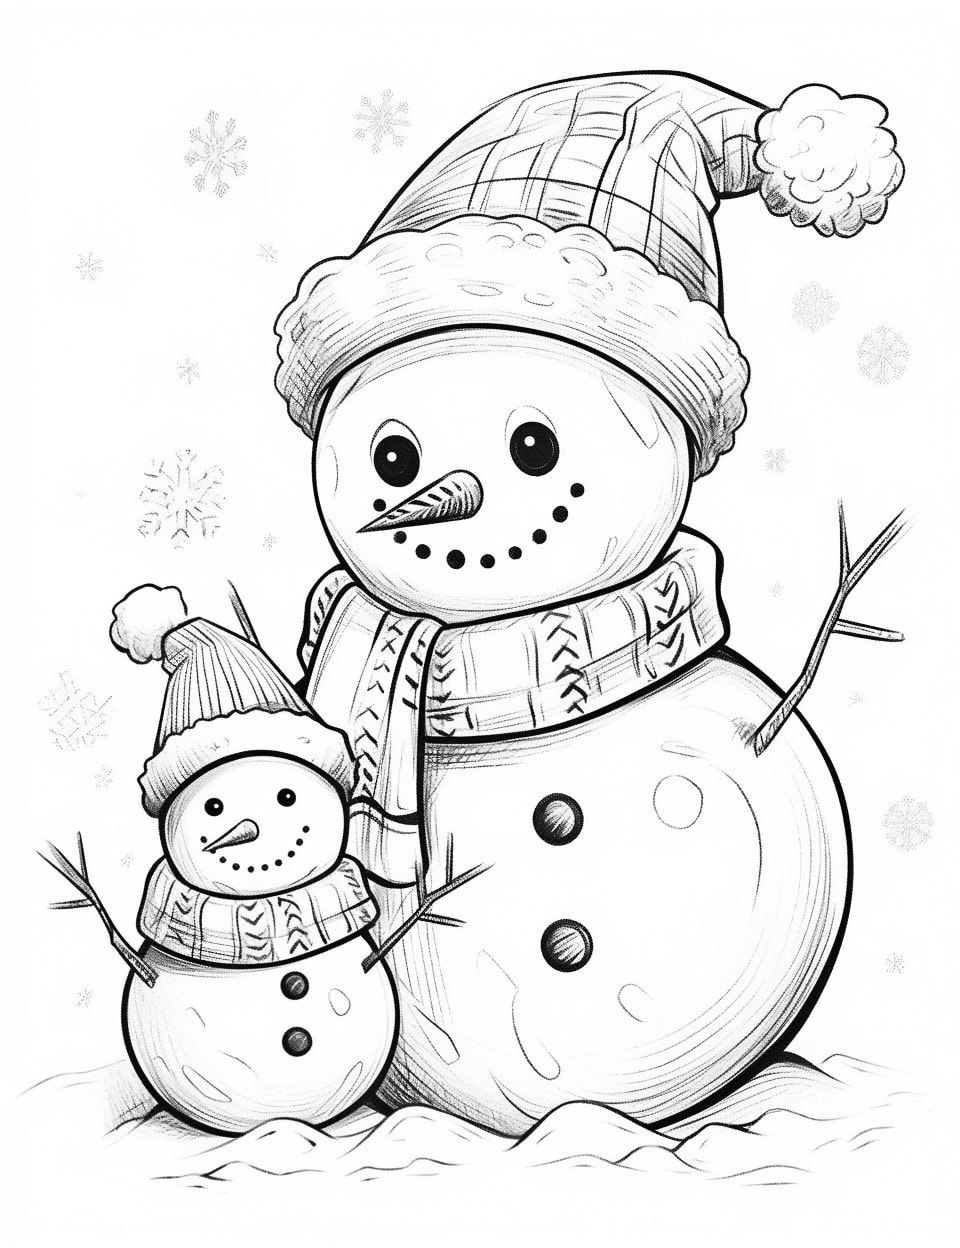 Snowman coloring pages for kids and adults